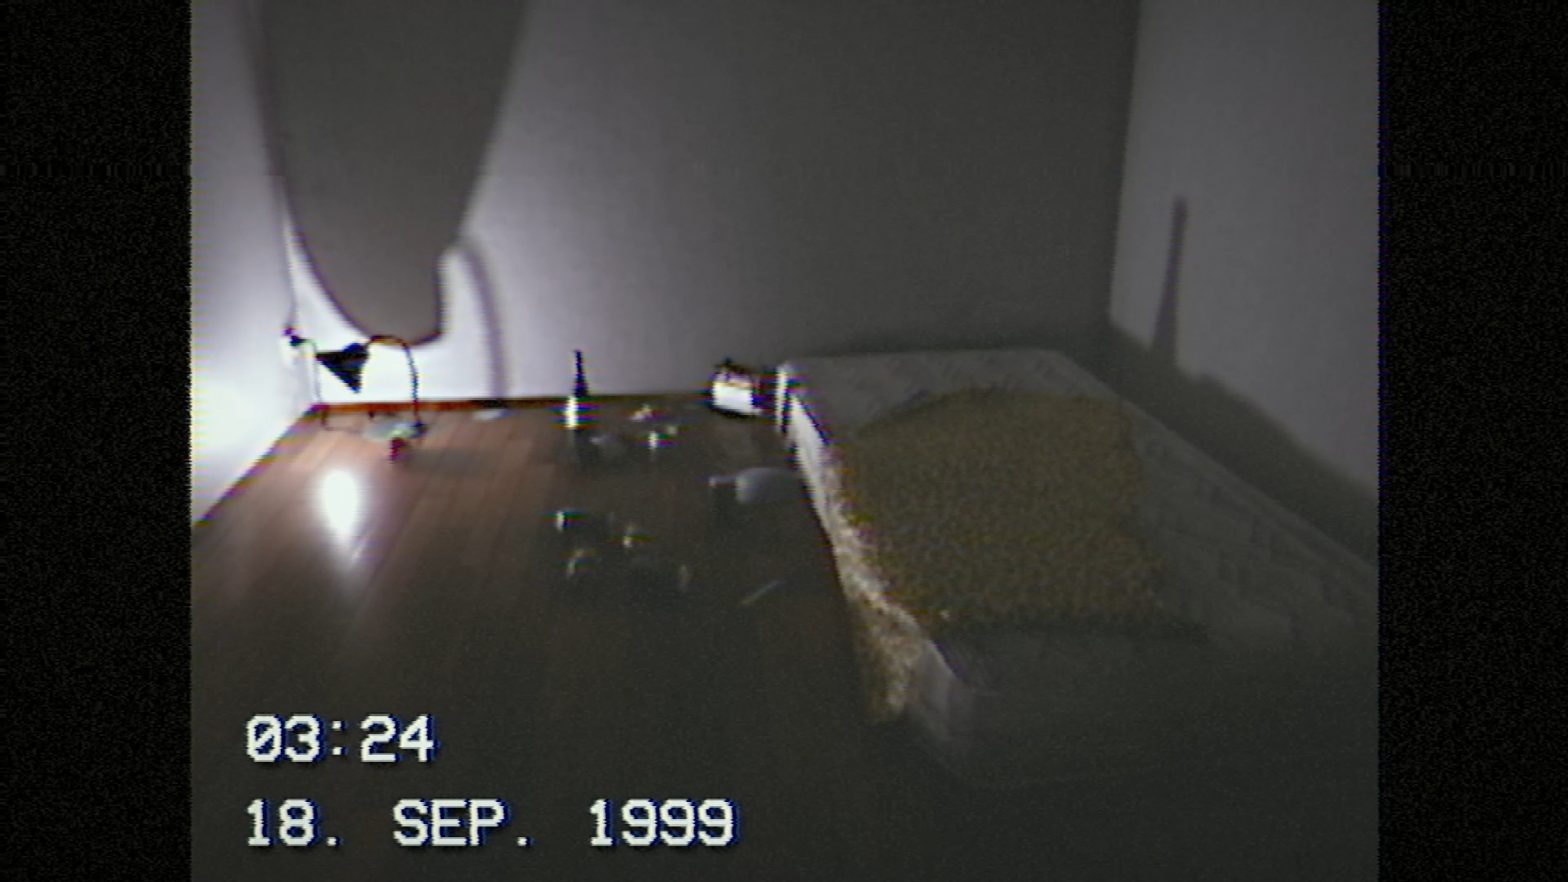 How SEPTEMBER 1999 Marries Narrative and Visual Style